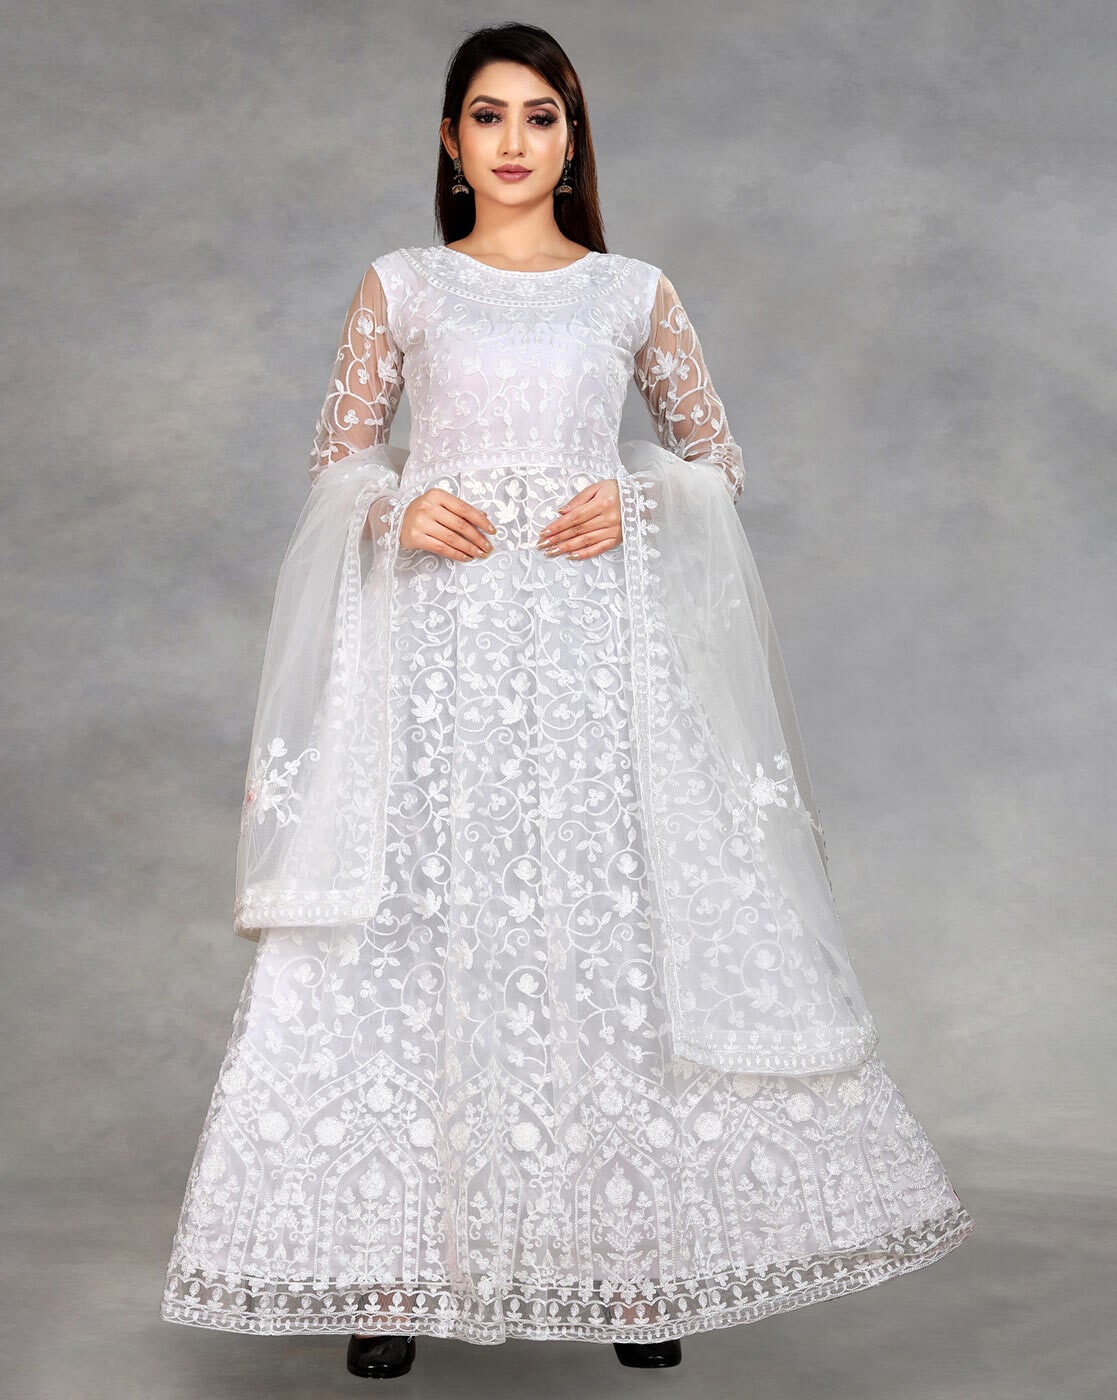 White Indian Gowns - Buy Indian Gown online at Clothsvilla.com